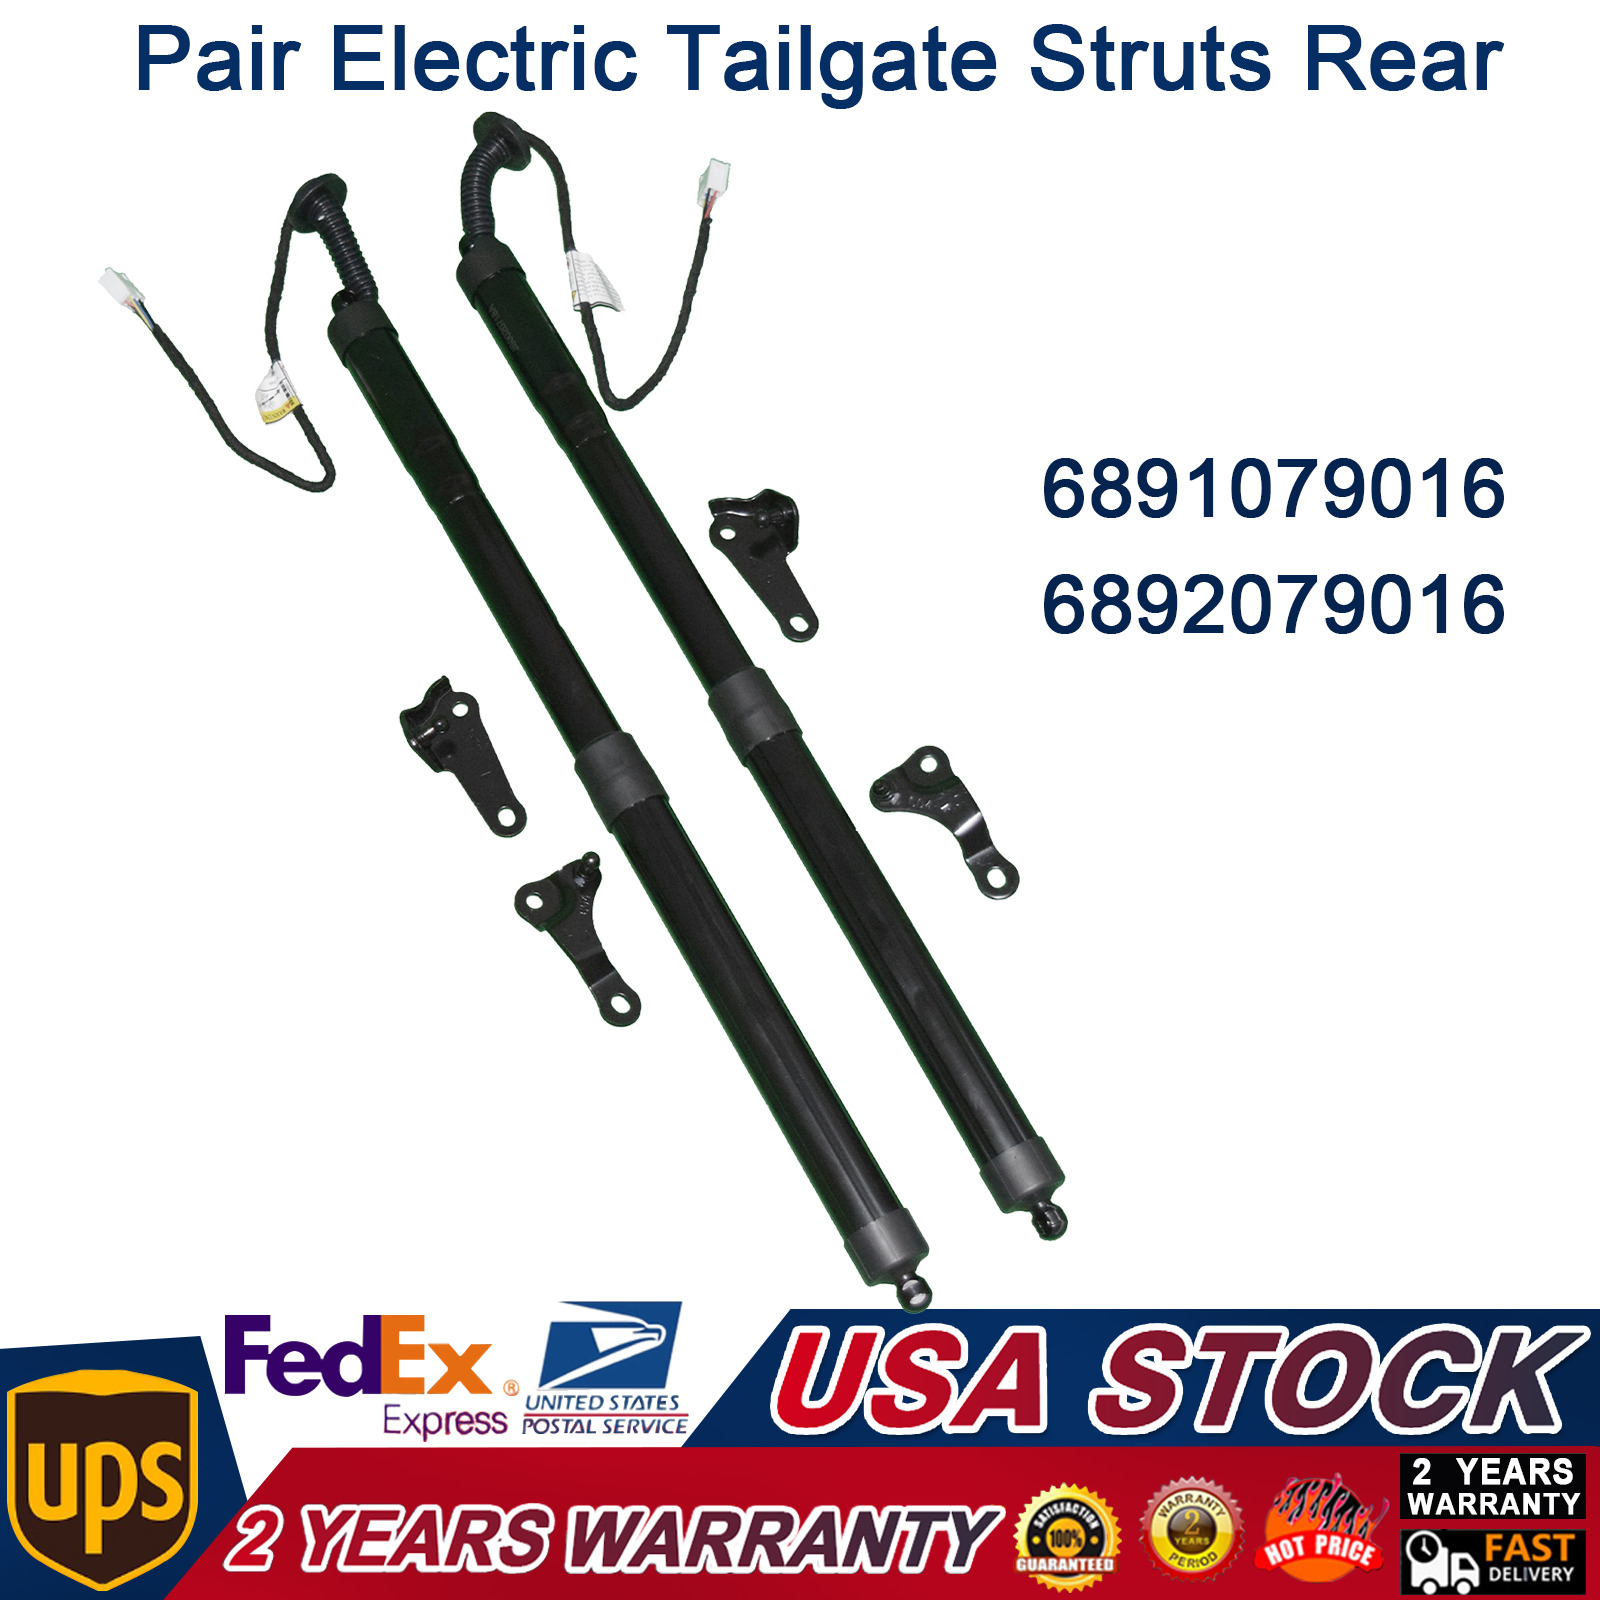 Pair Electric Tailgate Struts Rear For 2015-2020 Lexus NX200t NX300h 6892079016